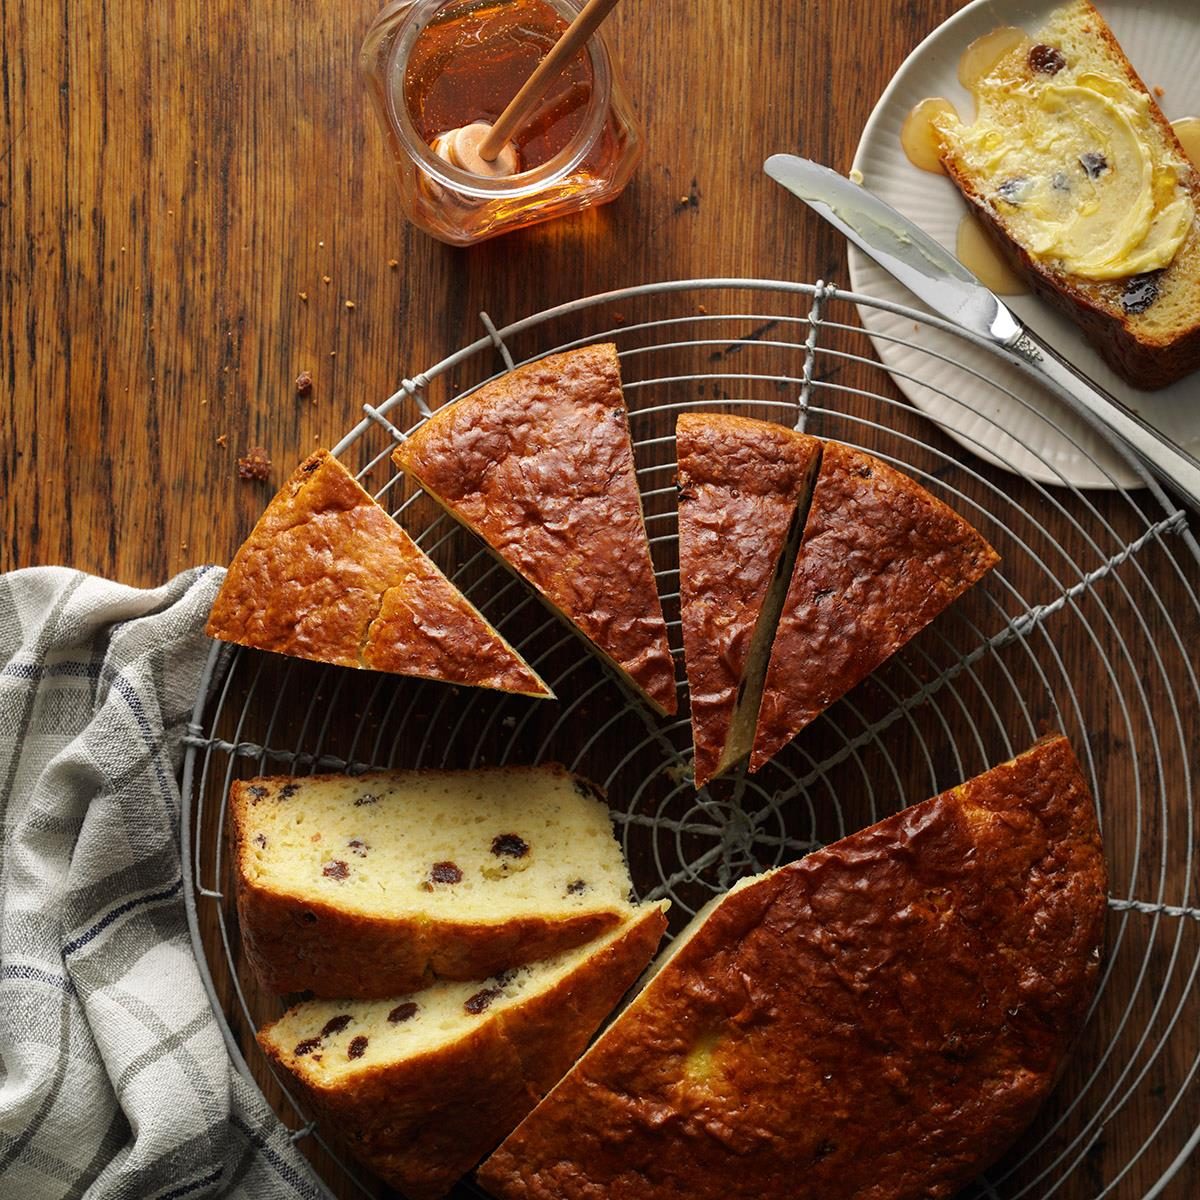 <p>My best friend, Rita, shared this irresistible Irish soda bread recipe. It bakes up high, with a golden brown top and a combination of sweet and savory flavors. —Jan Alfano, Prescott, Arizona</p> <div class="listicle-page__buttons"> <div class="listicle-page__cta-button"><a href='https://www.tasteofhome.com/recipes/favorite-irish-soda-bread/'>Go to Recipe</a></div> </div>